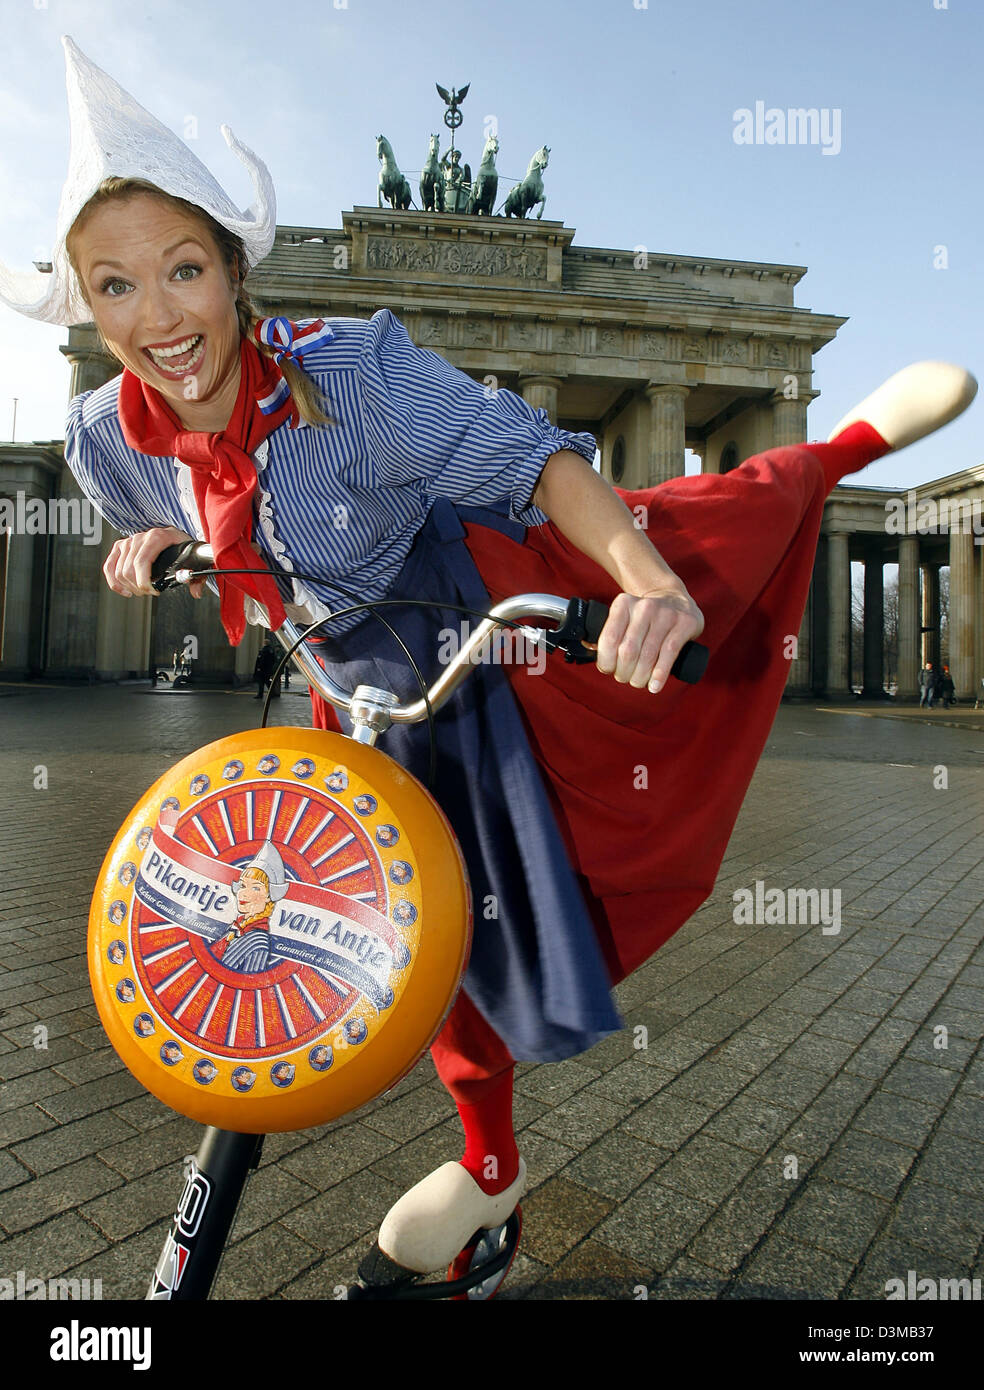 (dpa) - A model dressed as the advertising persona Frau Antje 'Miss Antje' poses with a bicycle and a loaf of cheese in front of the Brandenburg Gate in Berlin, Thursday, 12 January 2006. The 71st International Green Week agricultural fair runs from 13 January to 22 January 2006. Photo: Wolfgang Kumm Stock Photo